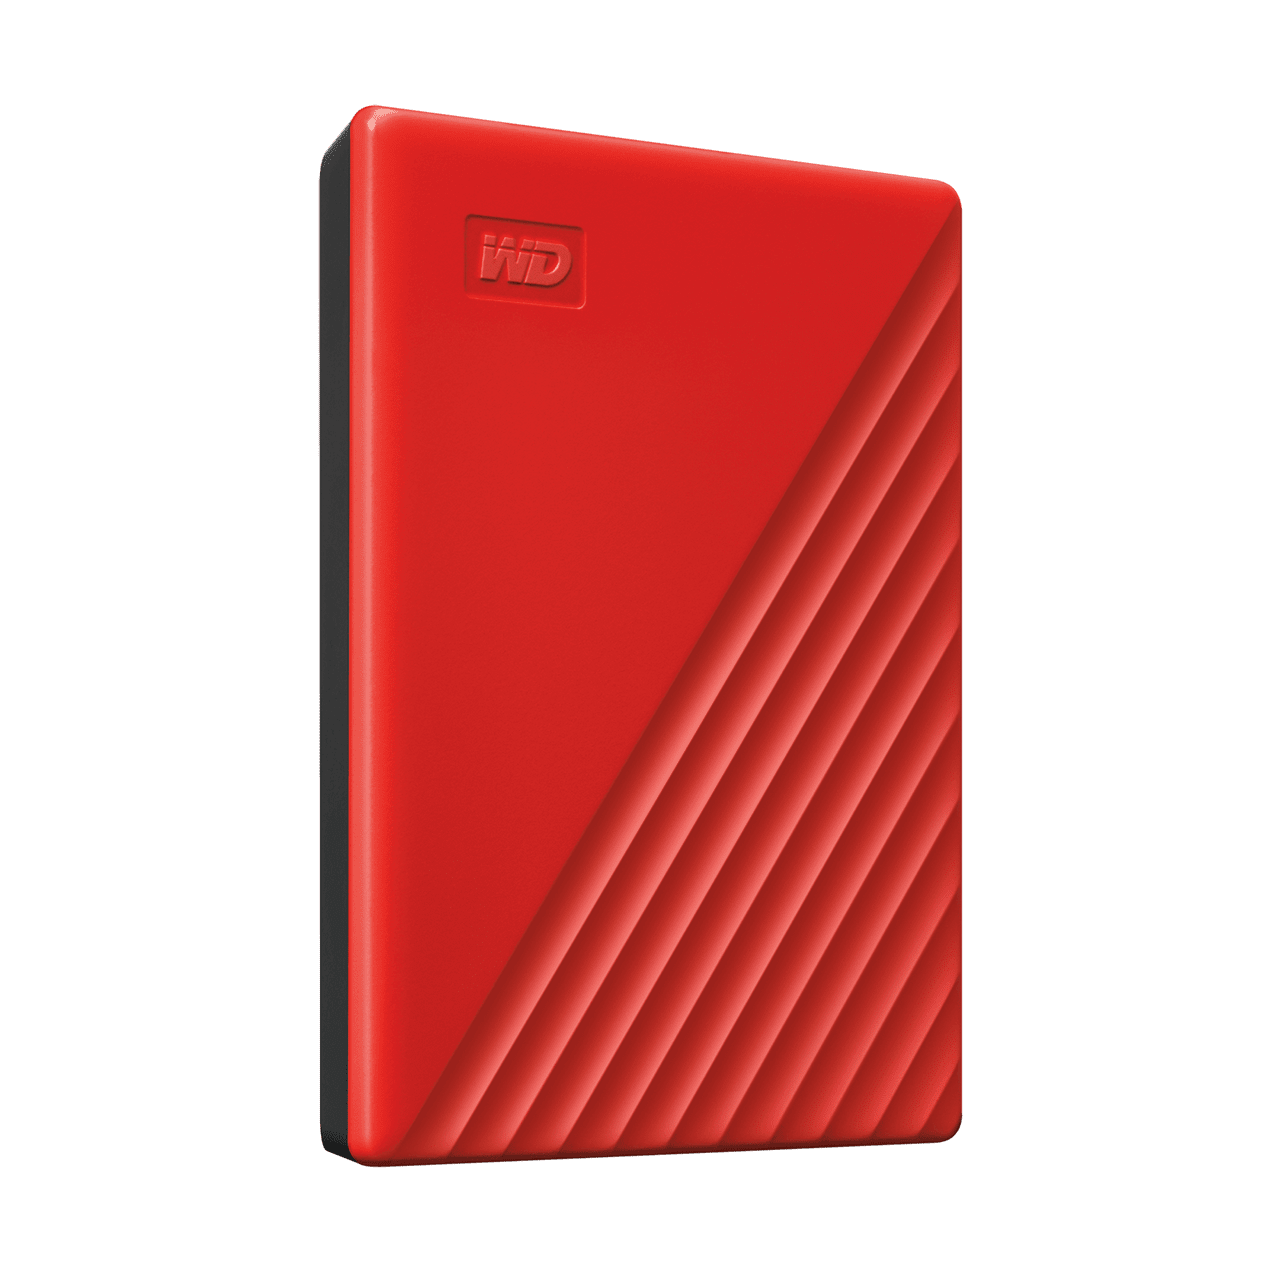 WD Western Digital My Passport  2TB ( RED ) Slim Portable External Hard Disk USB 3.0 With WD Backup Software & Password Protection